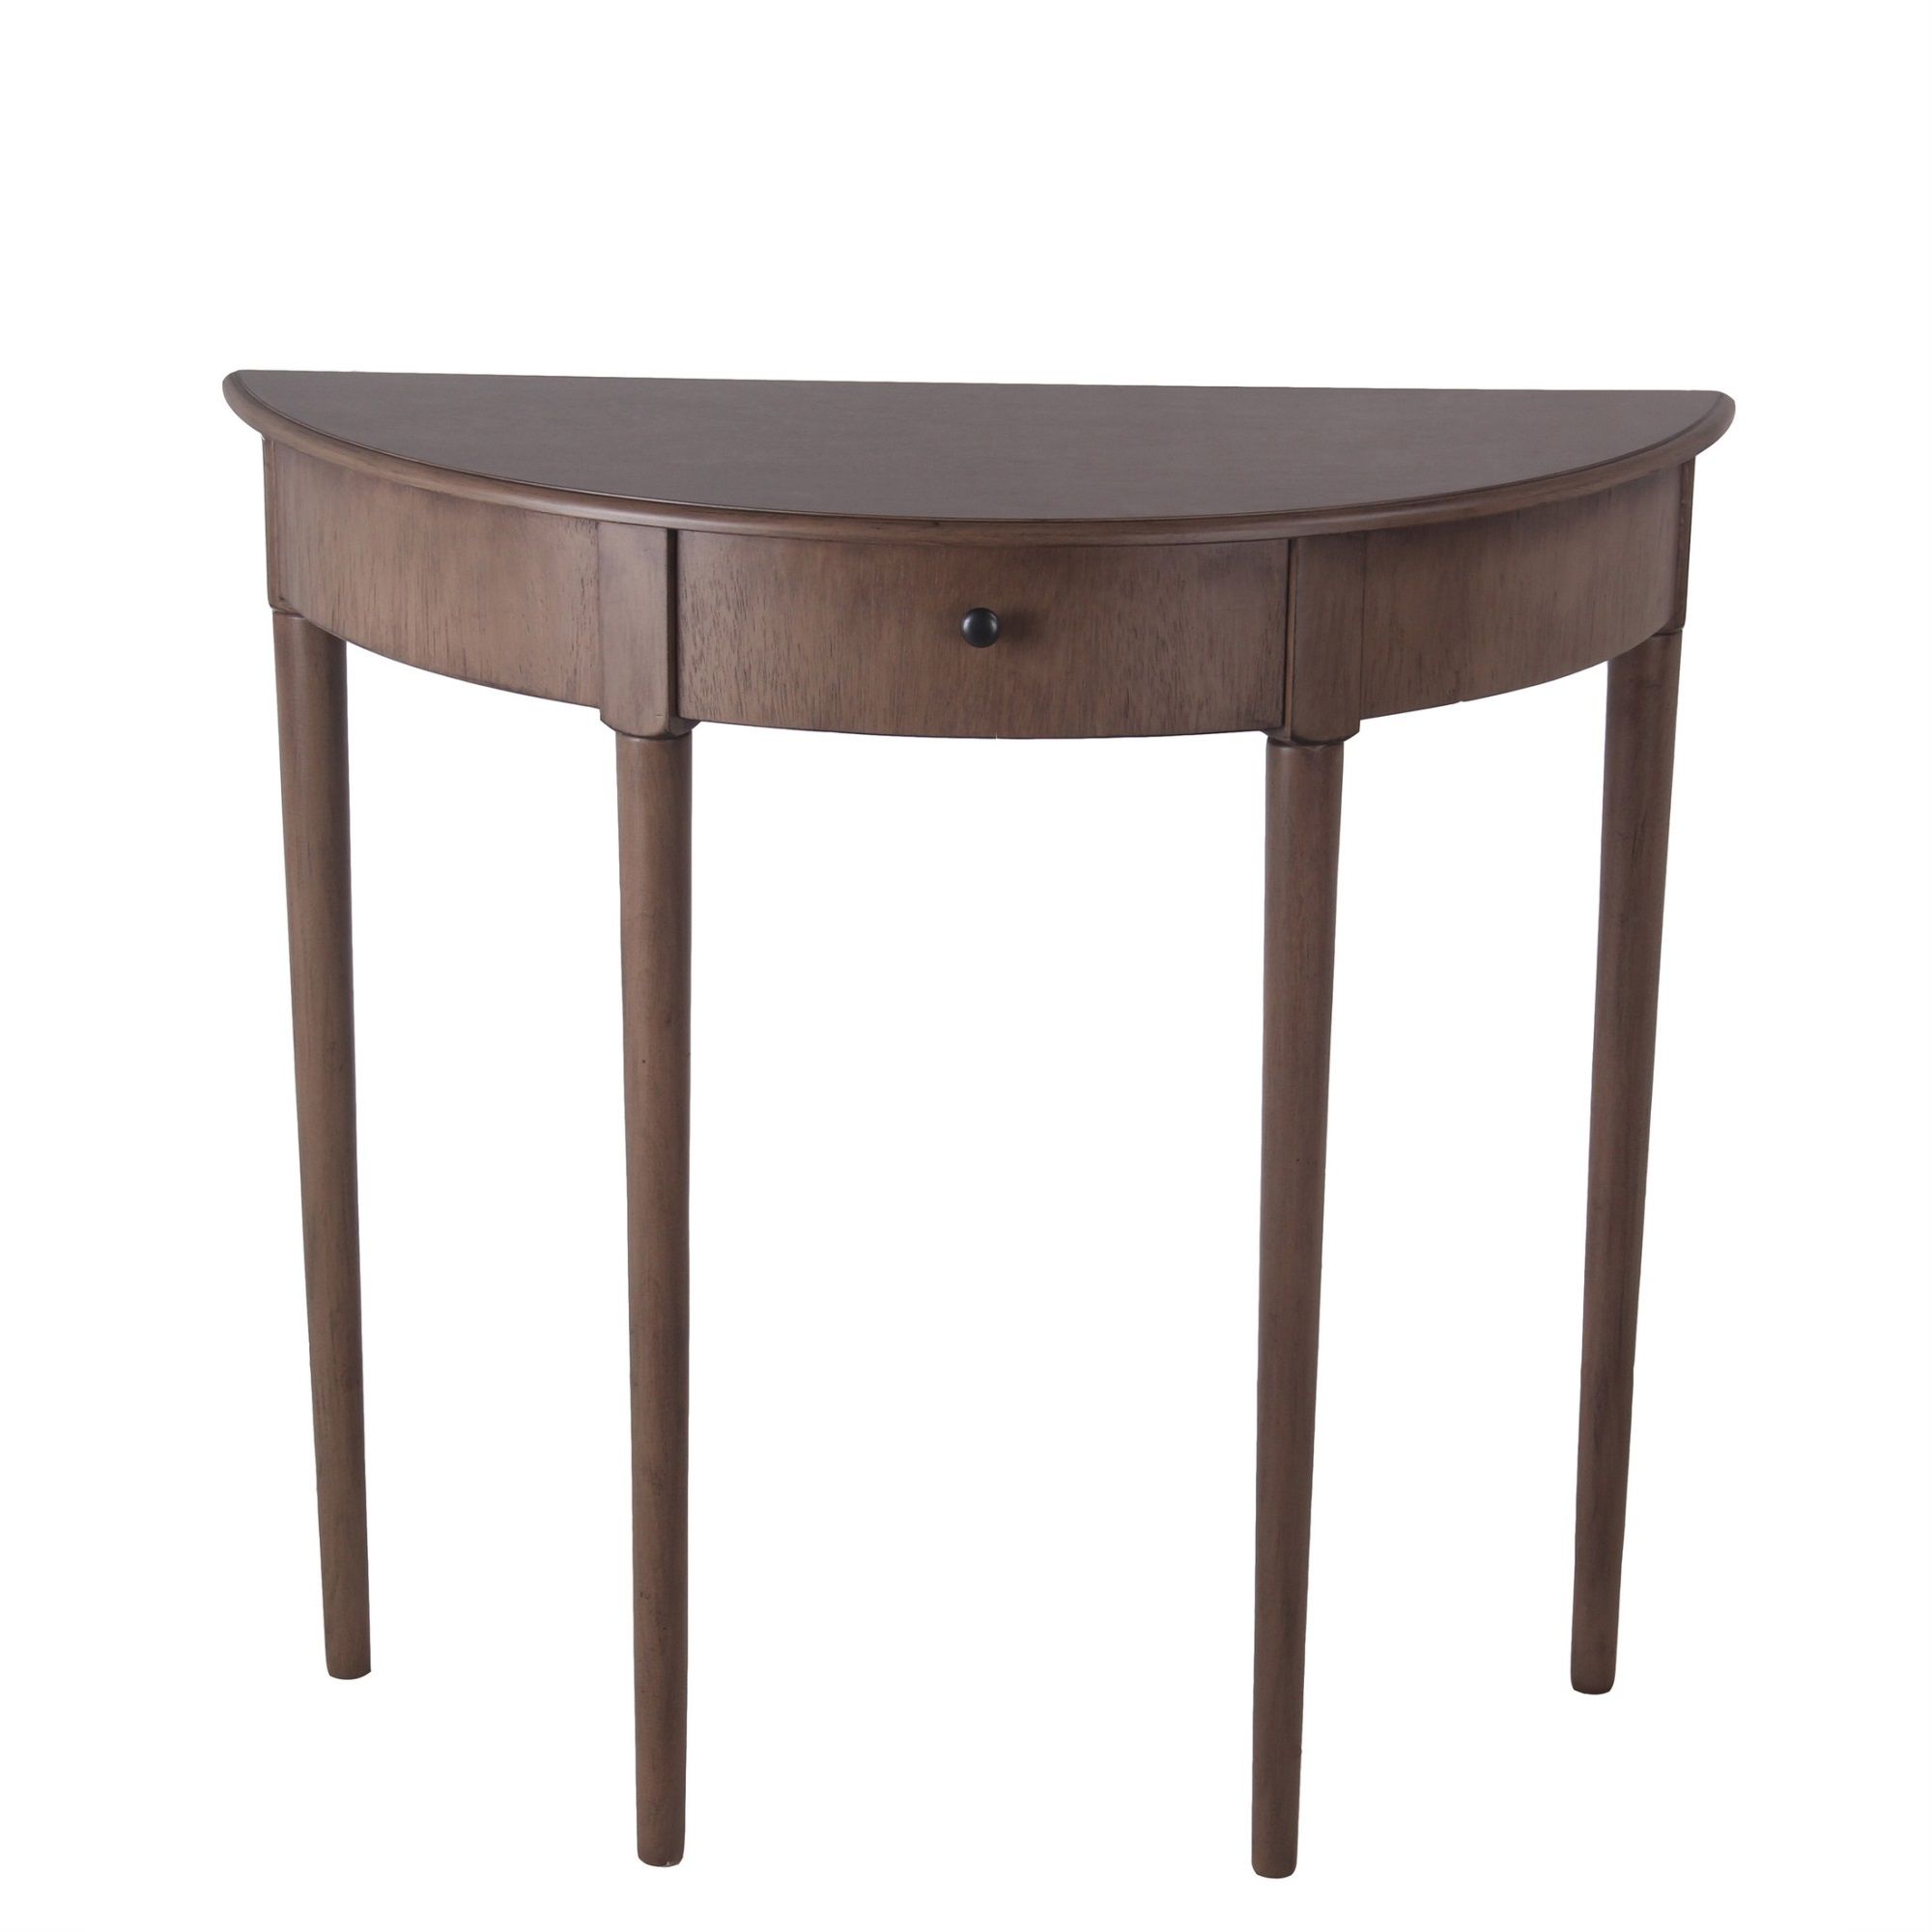 1 Drawer Half Moon Console Table With Round Legs, Brown Throughout Polished Chrome Round Console Tables (View 13 of 20)